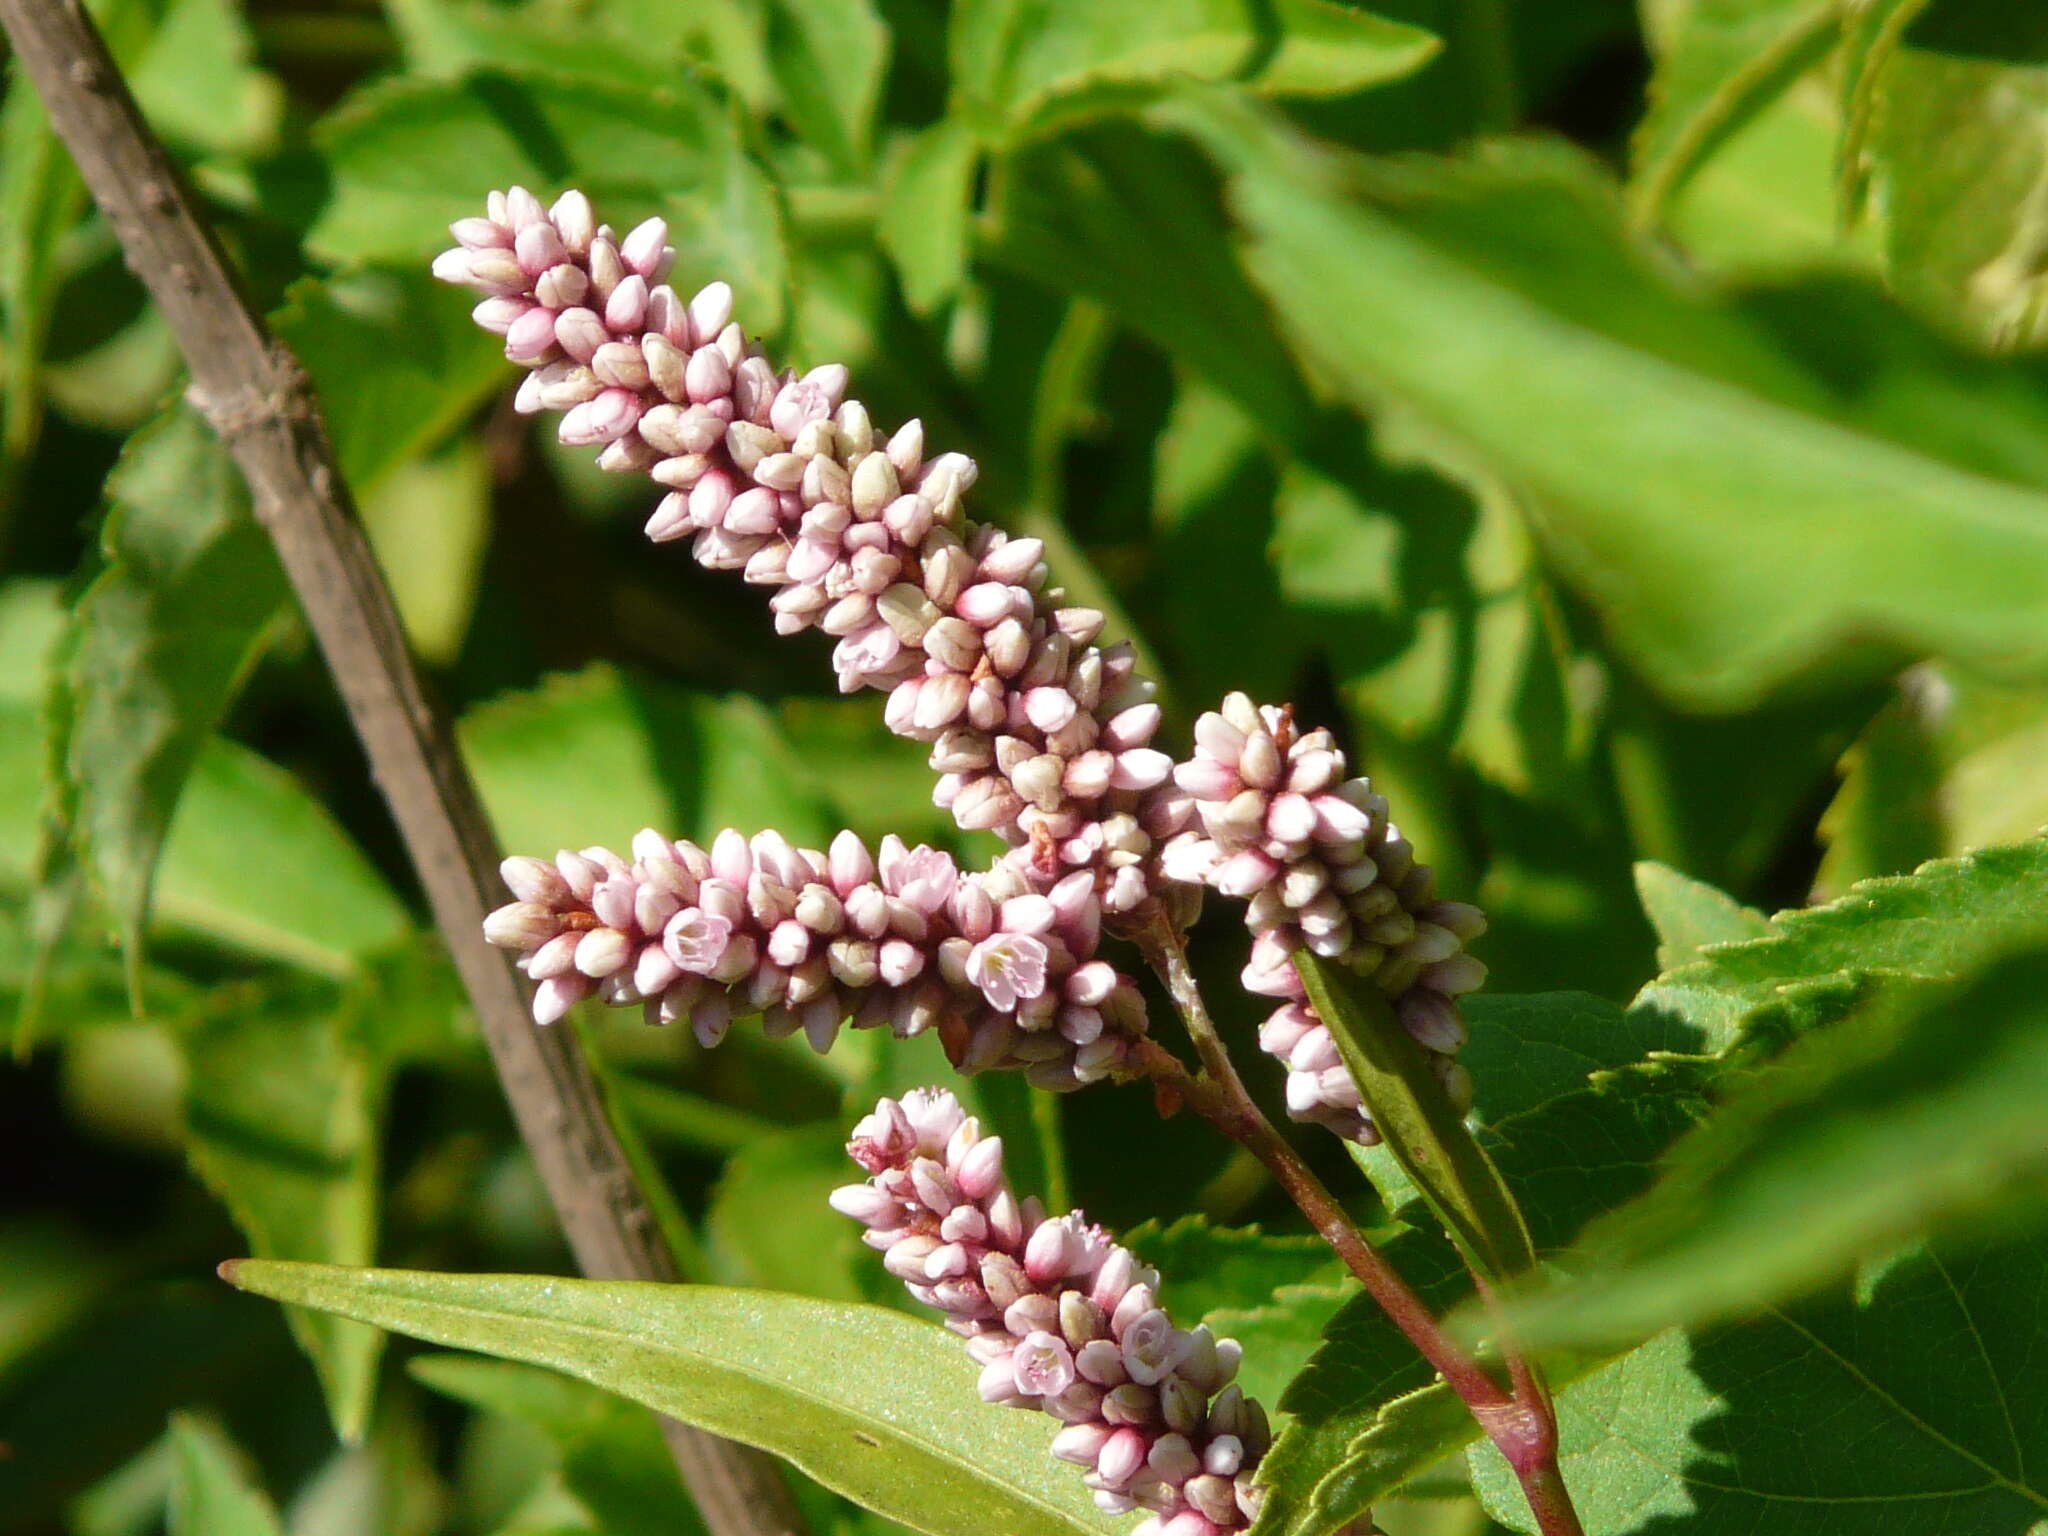 Image of Smooth Smartweed